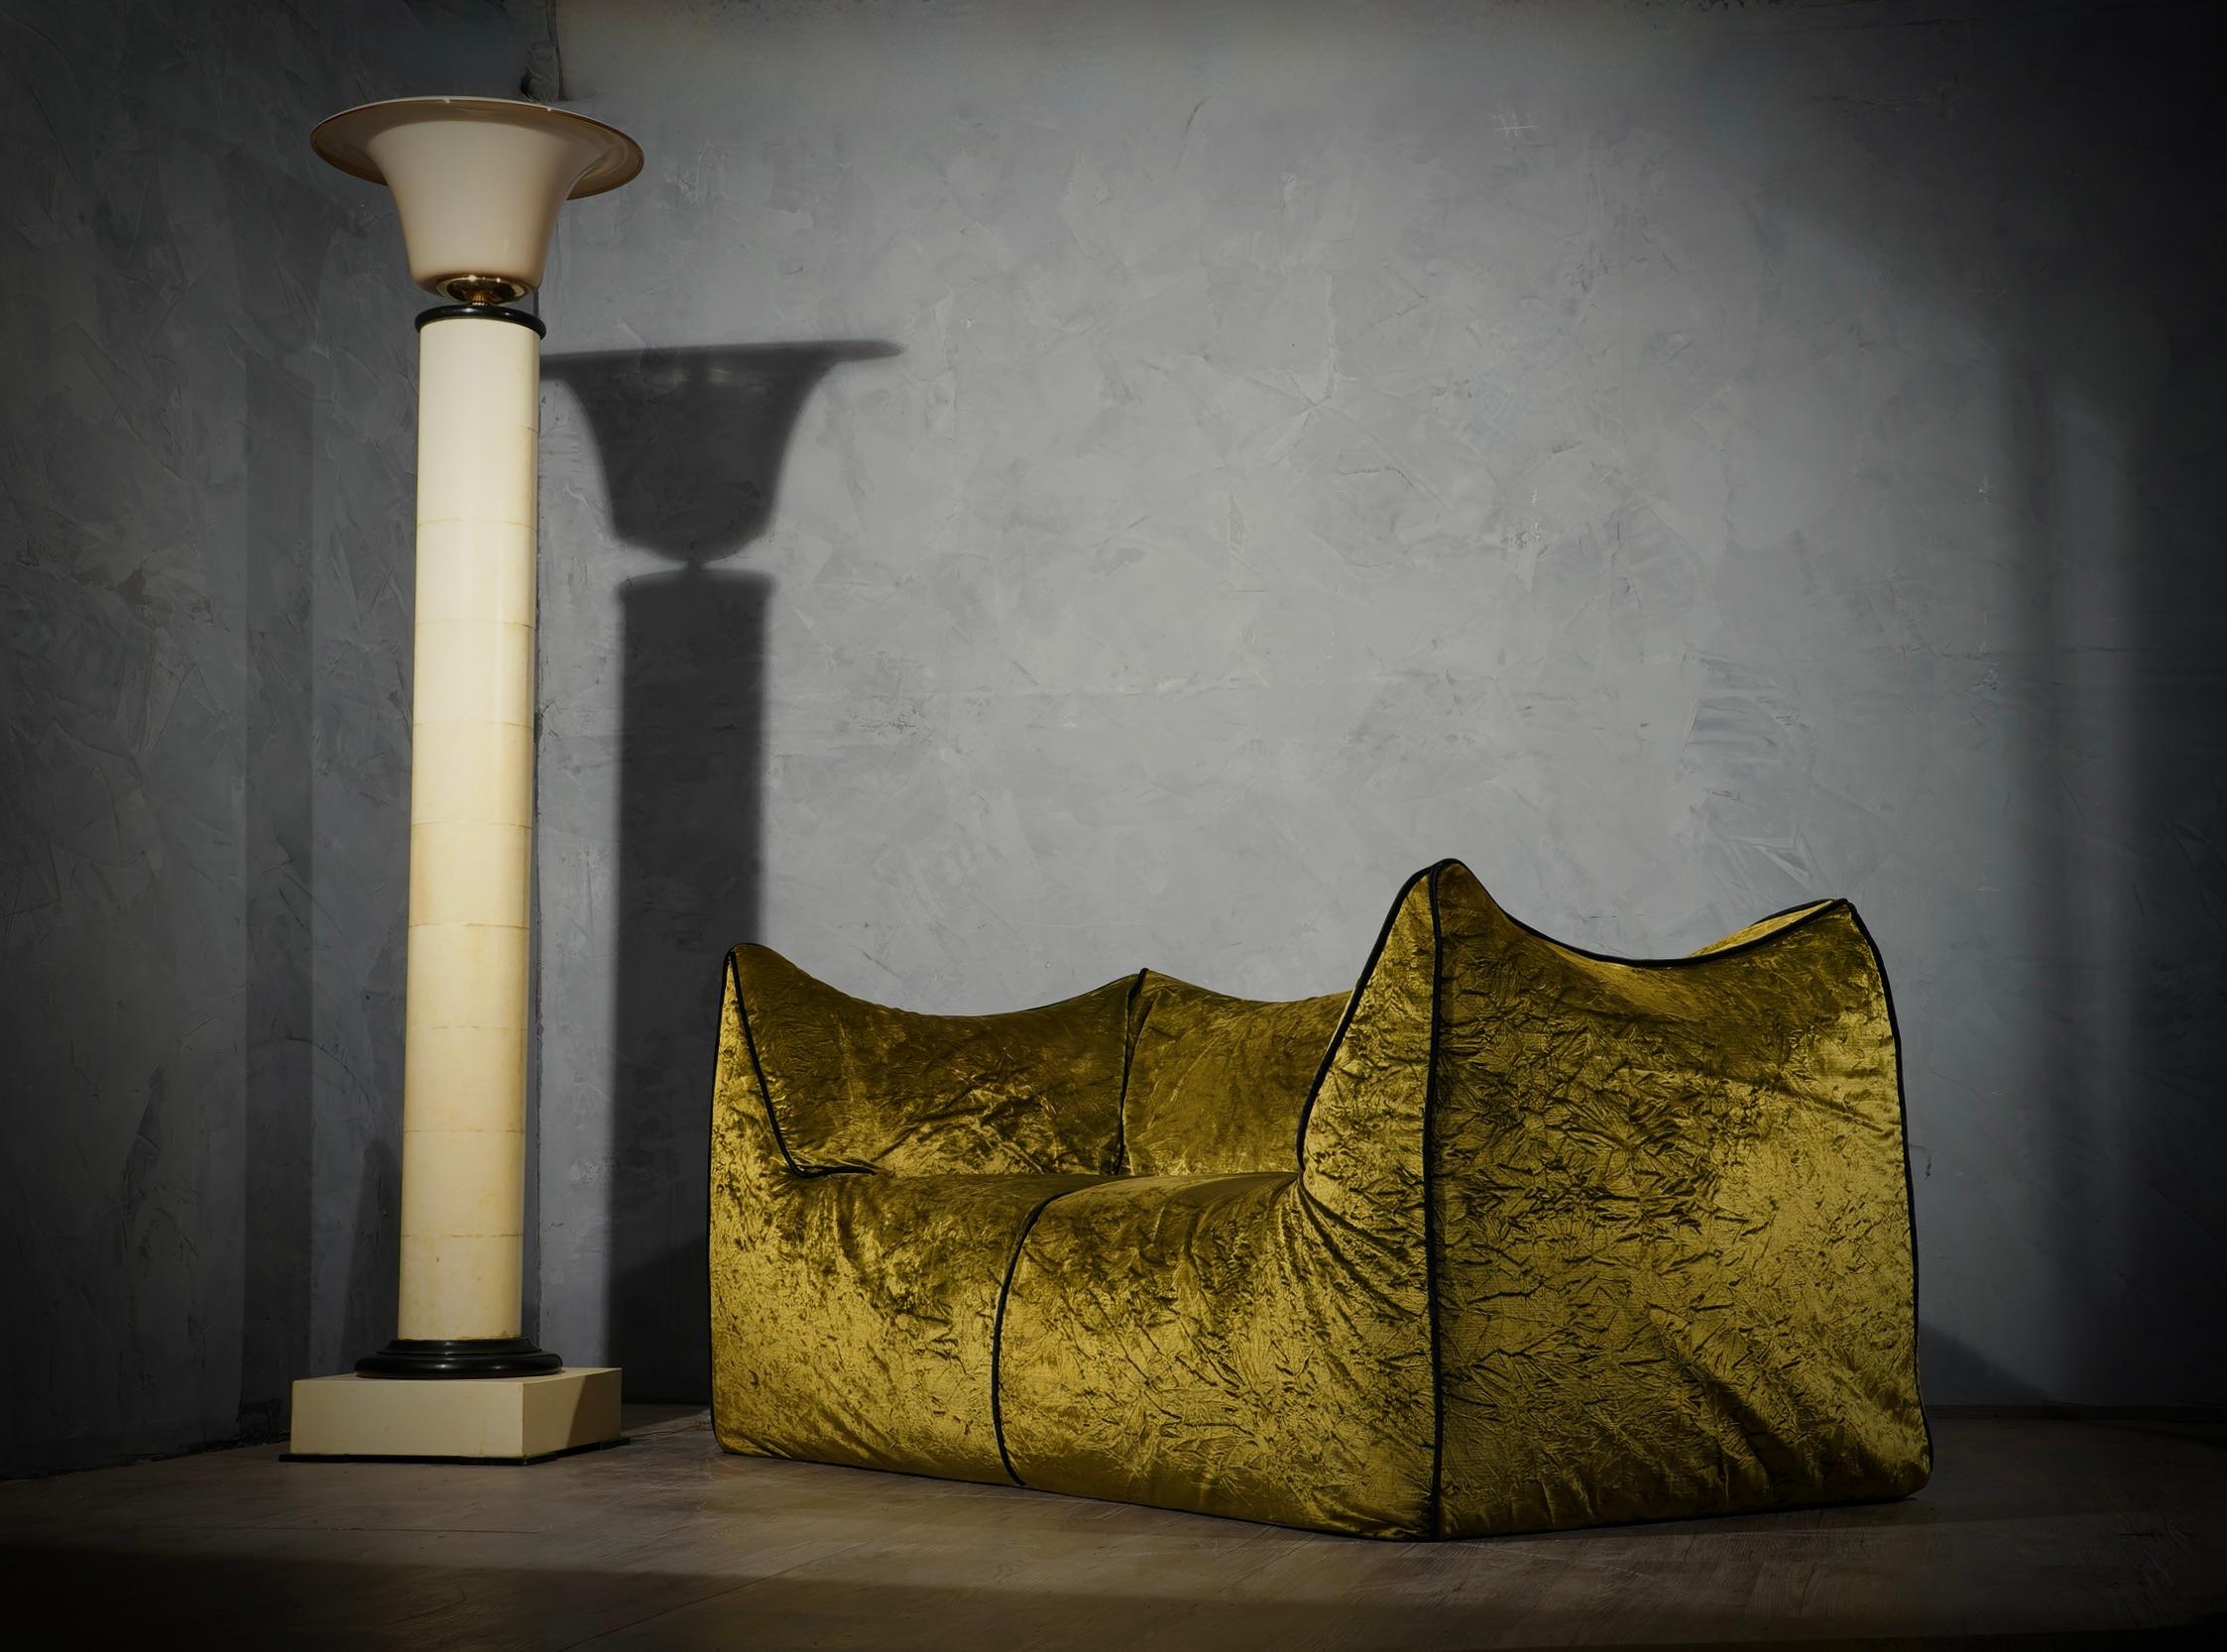 Very stylish floor lamp in Murano glass and goatskin, perfect match for a floor lamp with a sensational and unique design.

The floor lamp is made up of a long and cylindrical wooden body covered in goatskin, mounted on a square base always covered